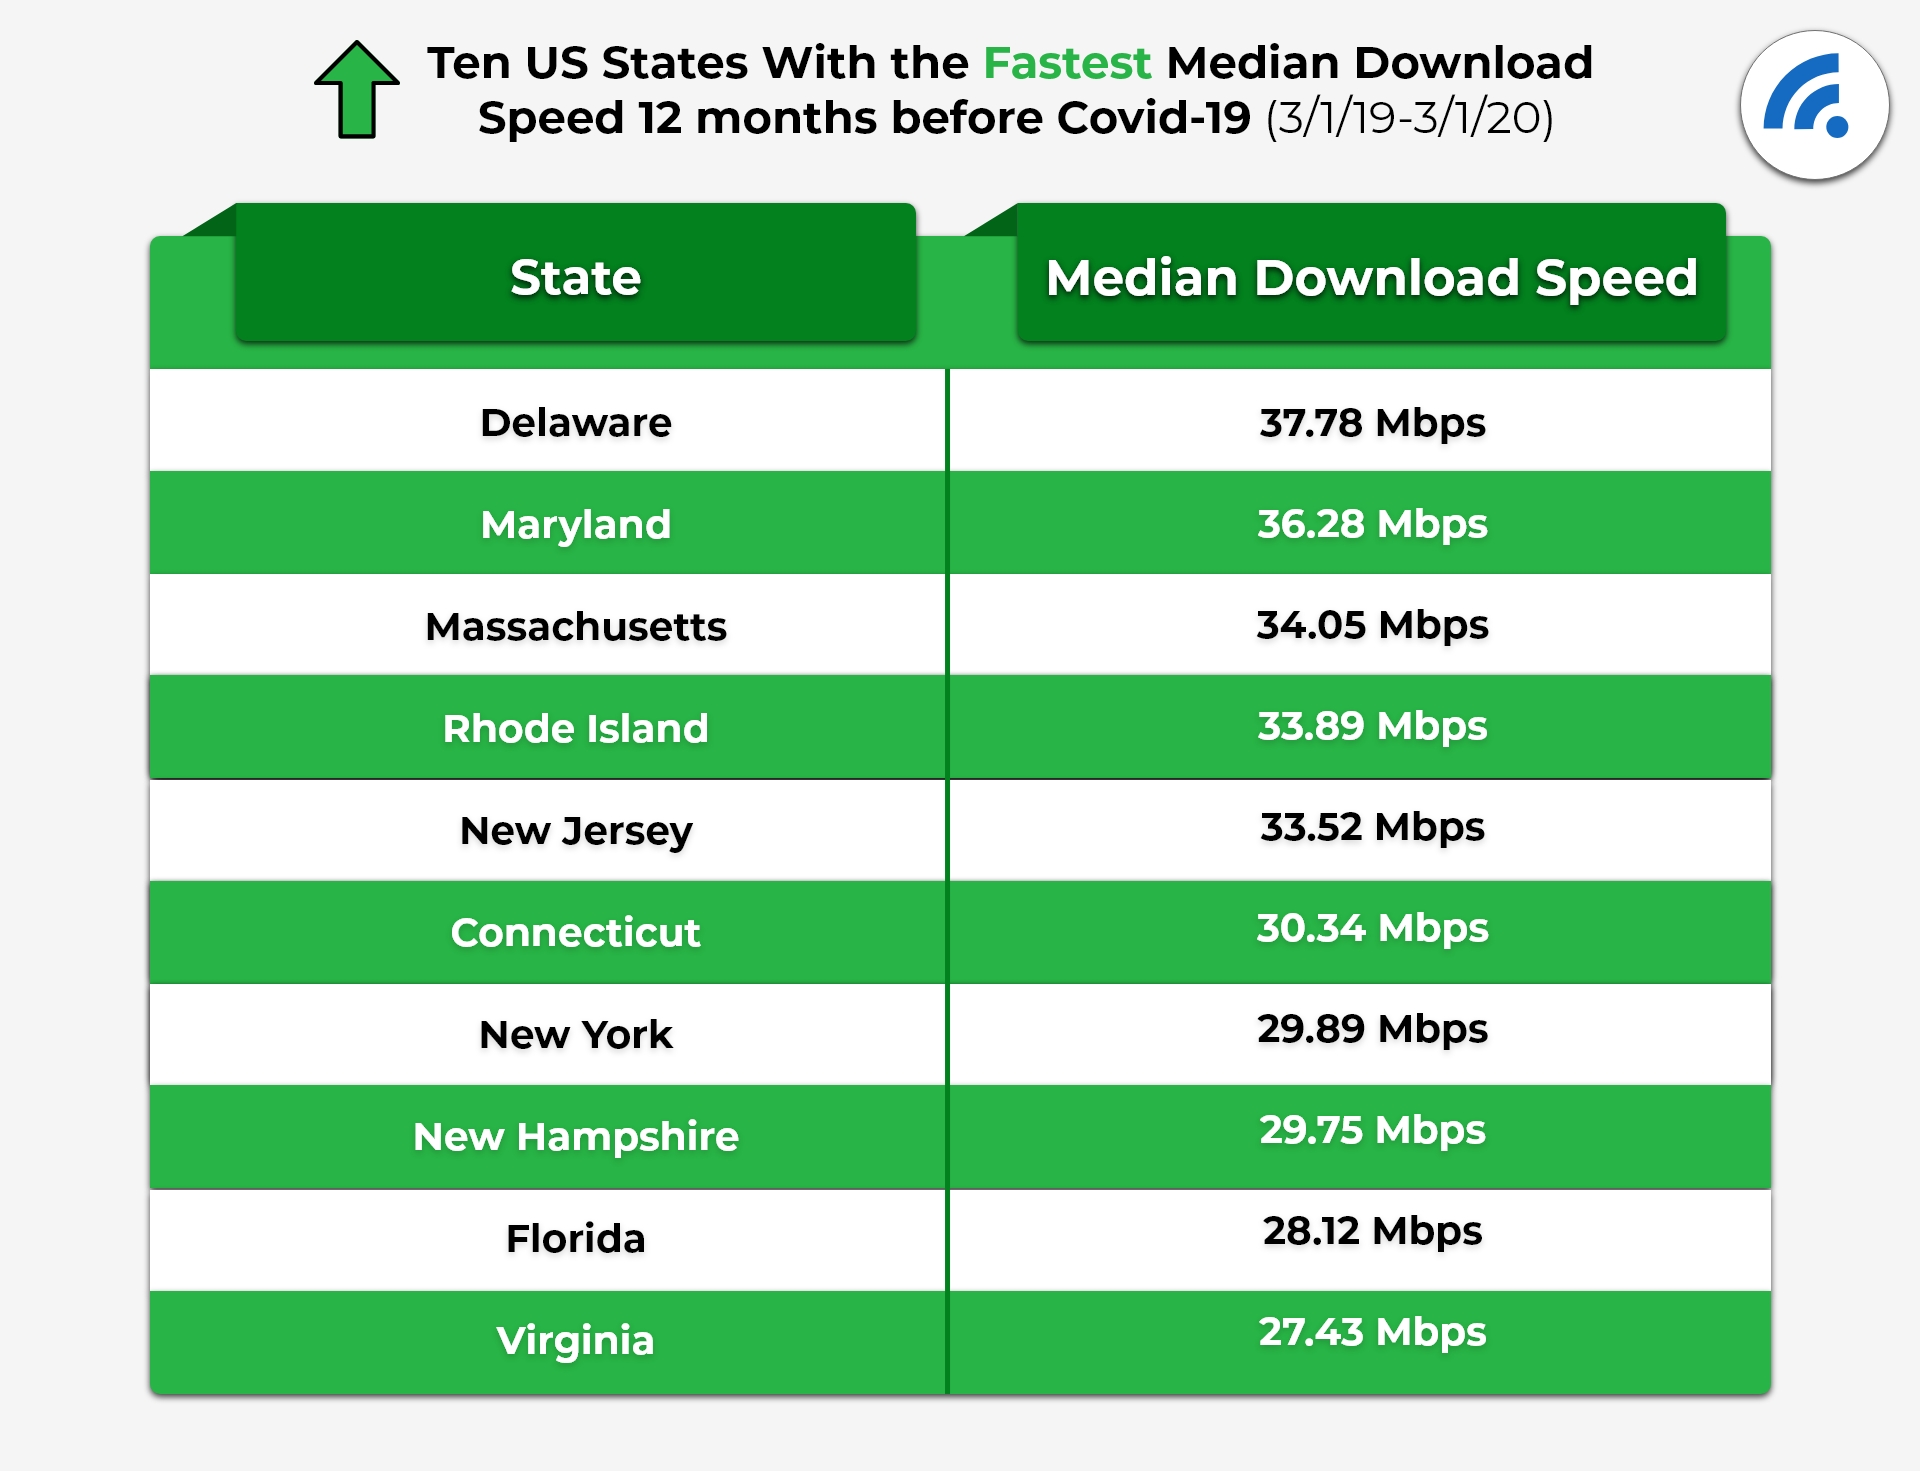 How Has COVID-19 Impacted Internet Speed In Your State?